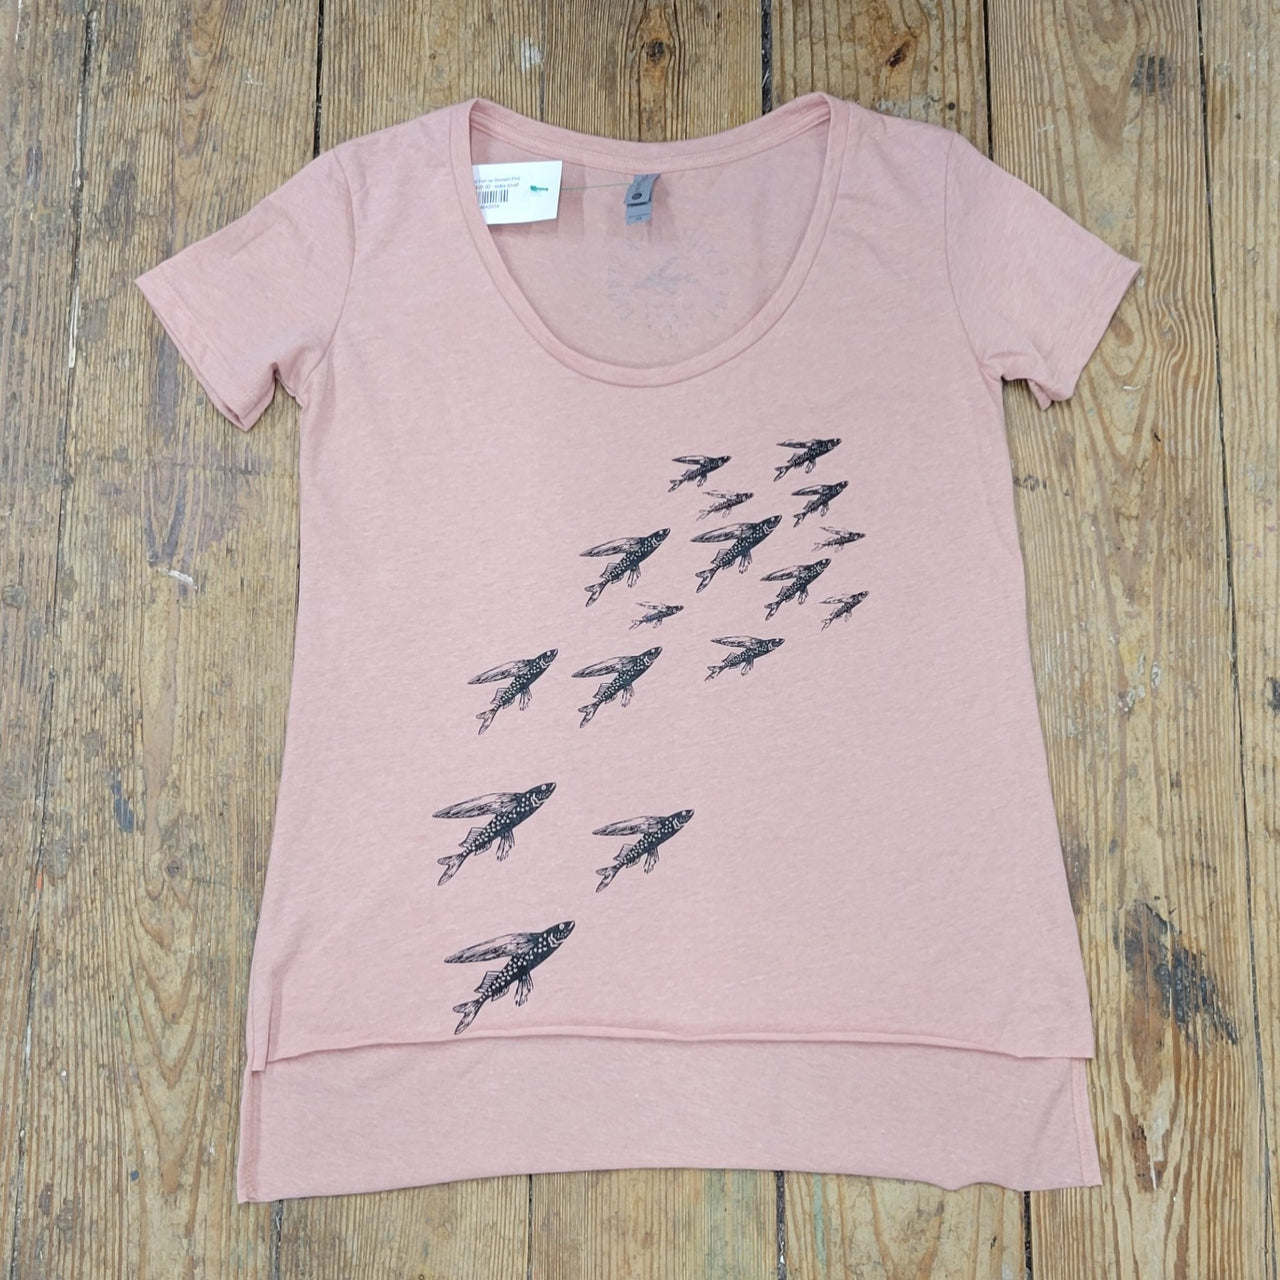 A dusty pink t-shirt featuring the 'School of Fish' design on the front chest in black ink.